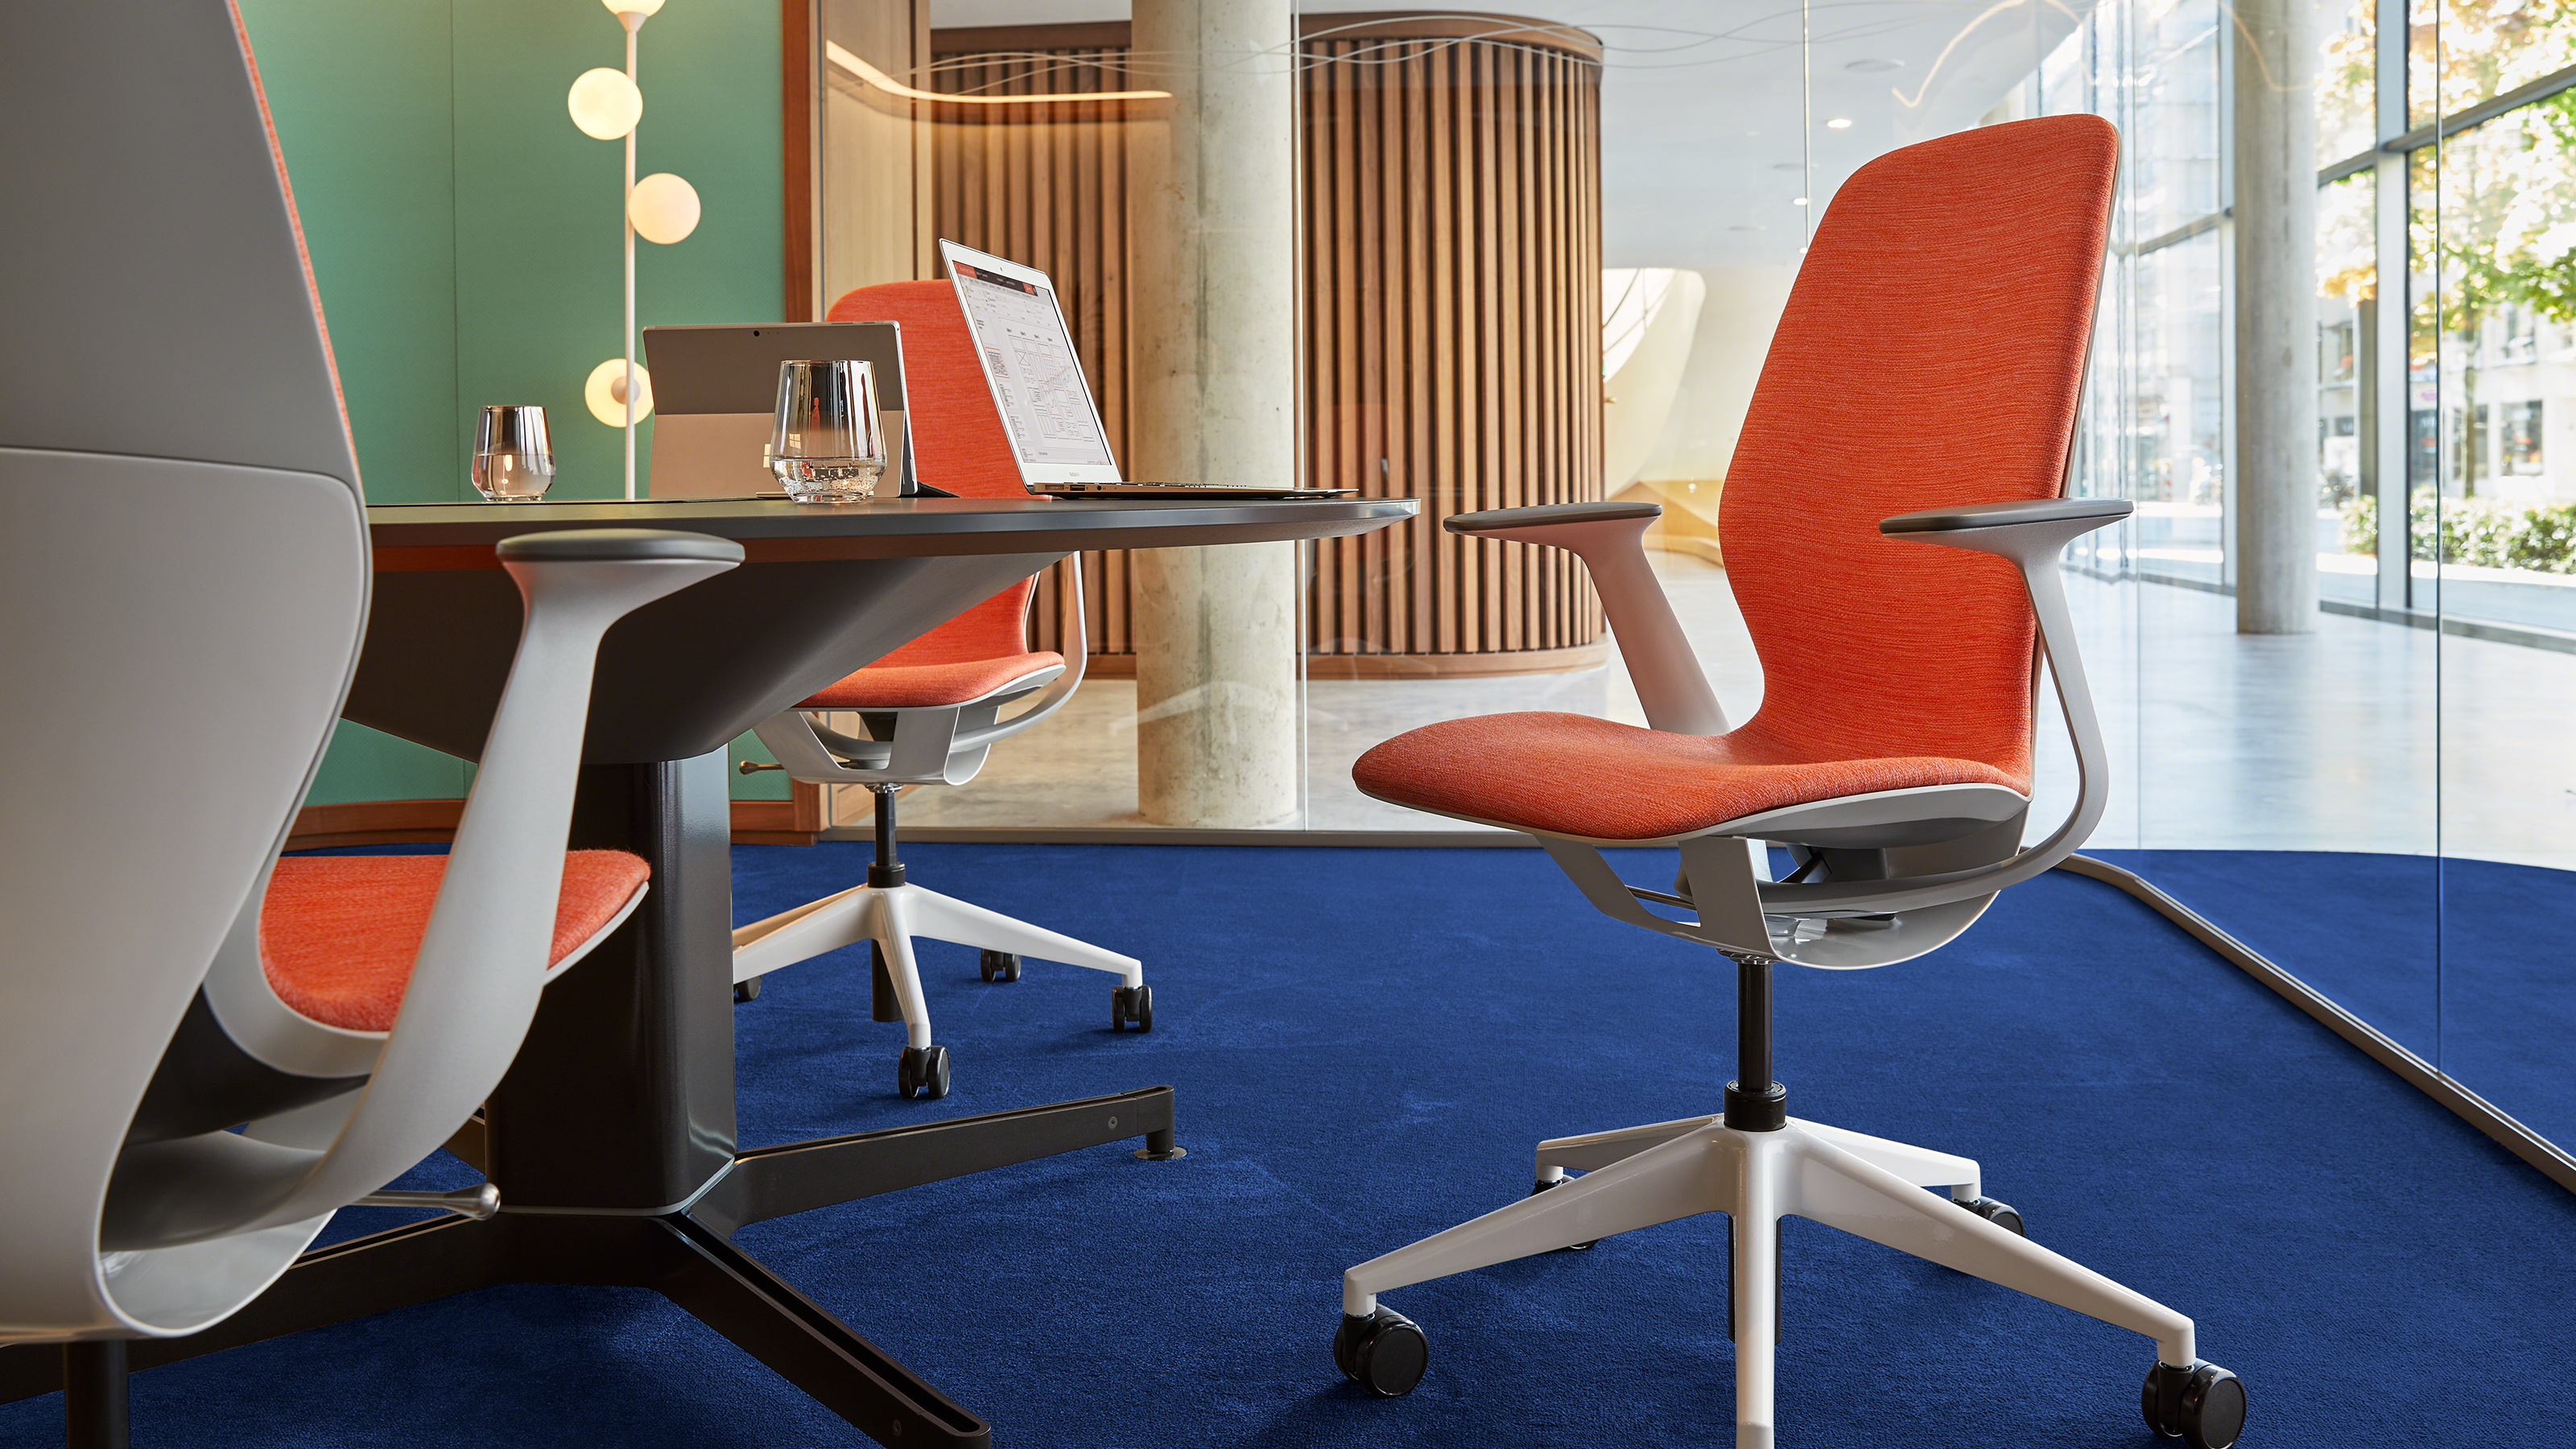 Silq by Steelcase